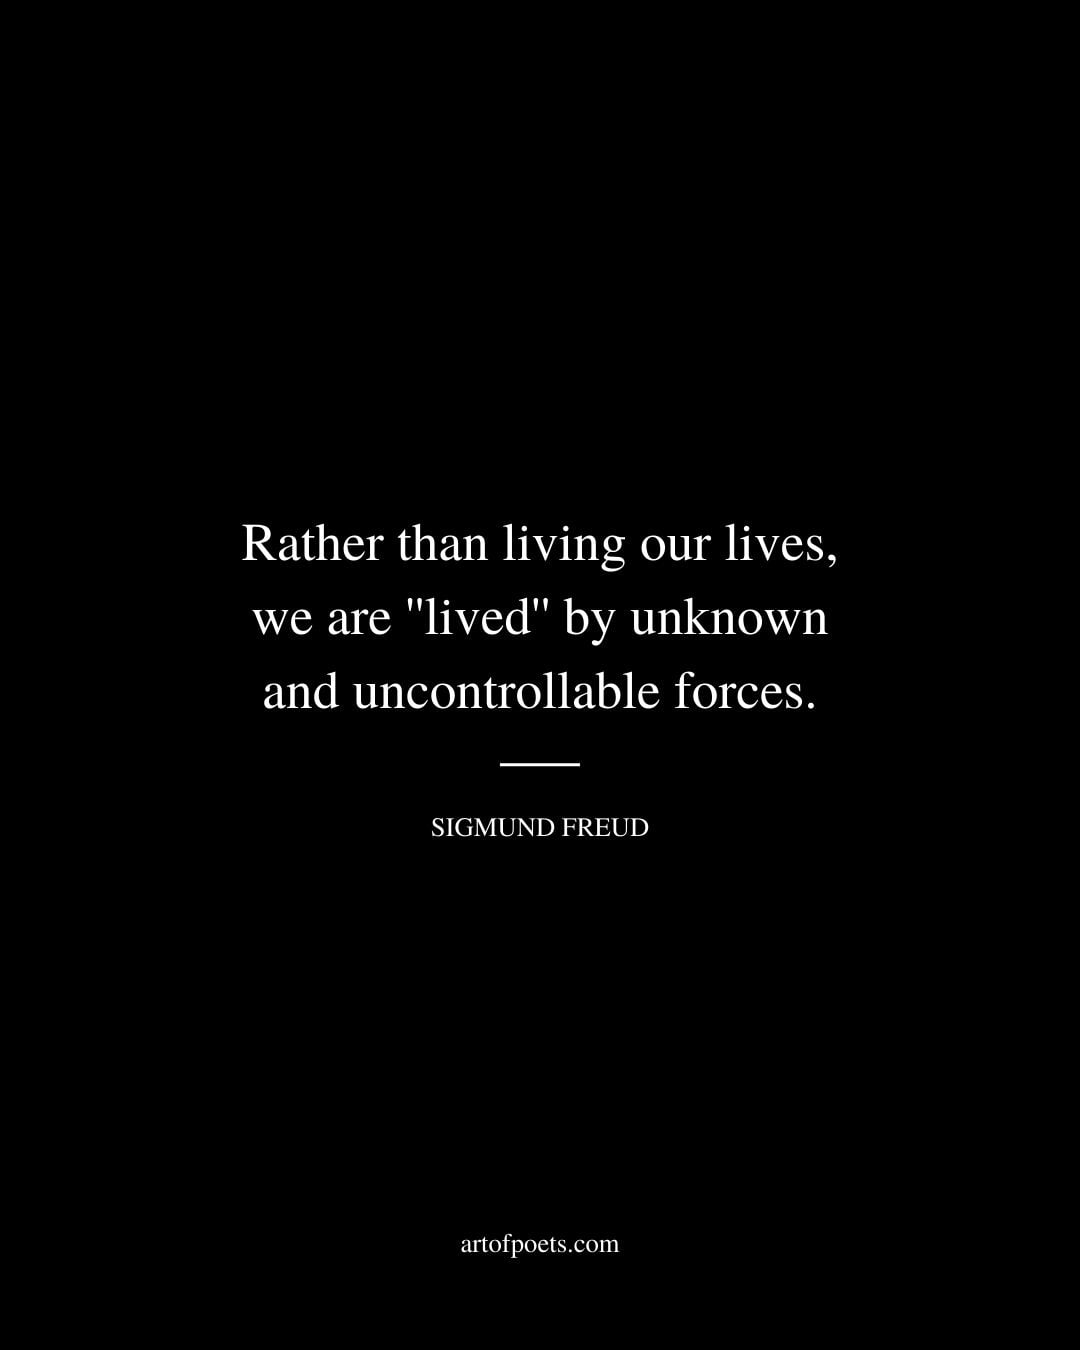 Rather than living our lives we are lived by unknown and uncontrollable forces